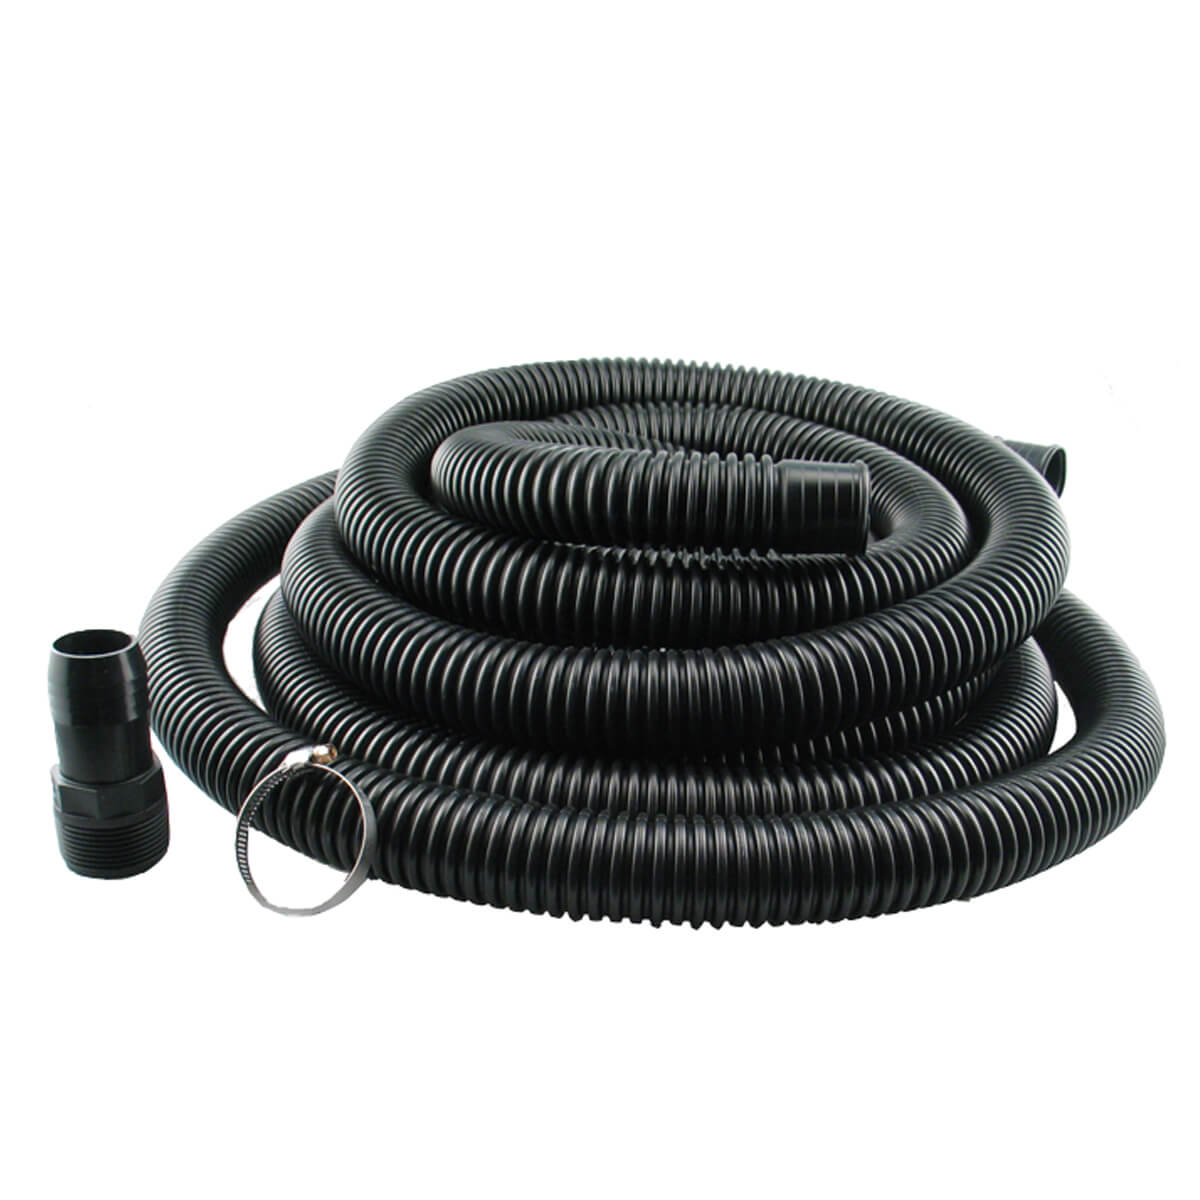 Sump Pump Discharge Kit - 1-1/2-in x 24-ft